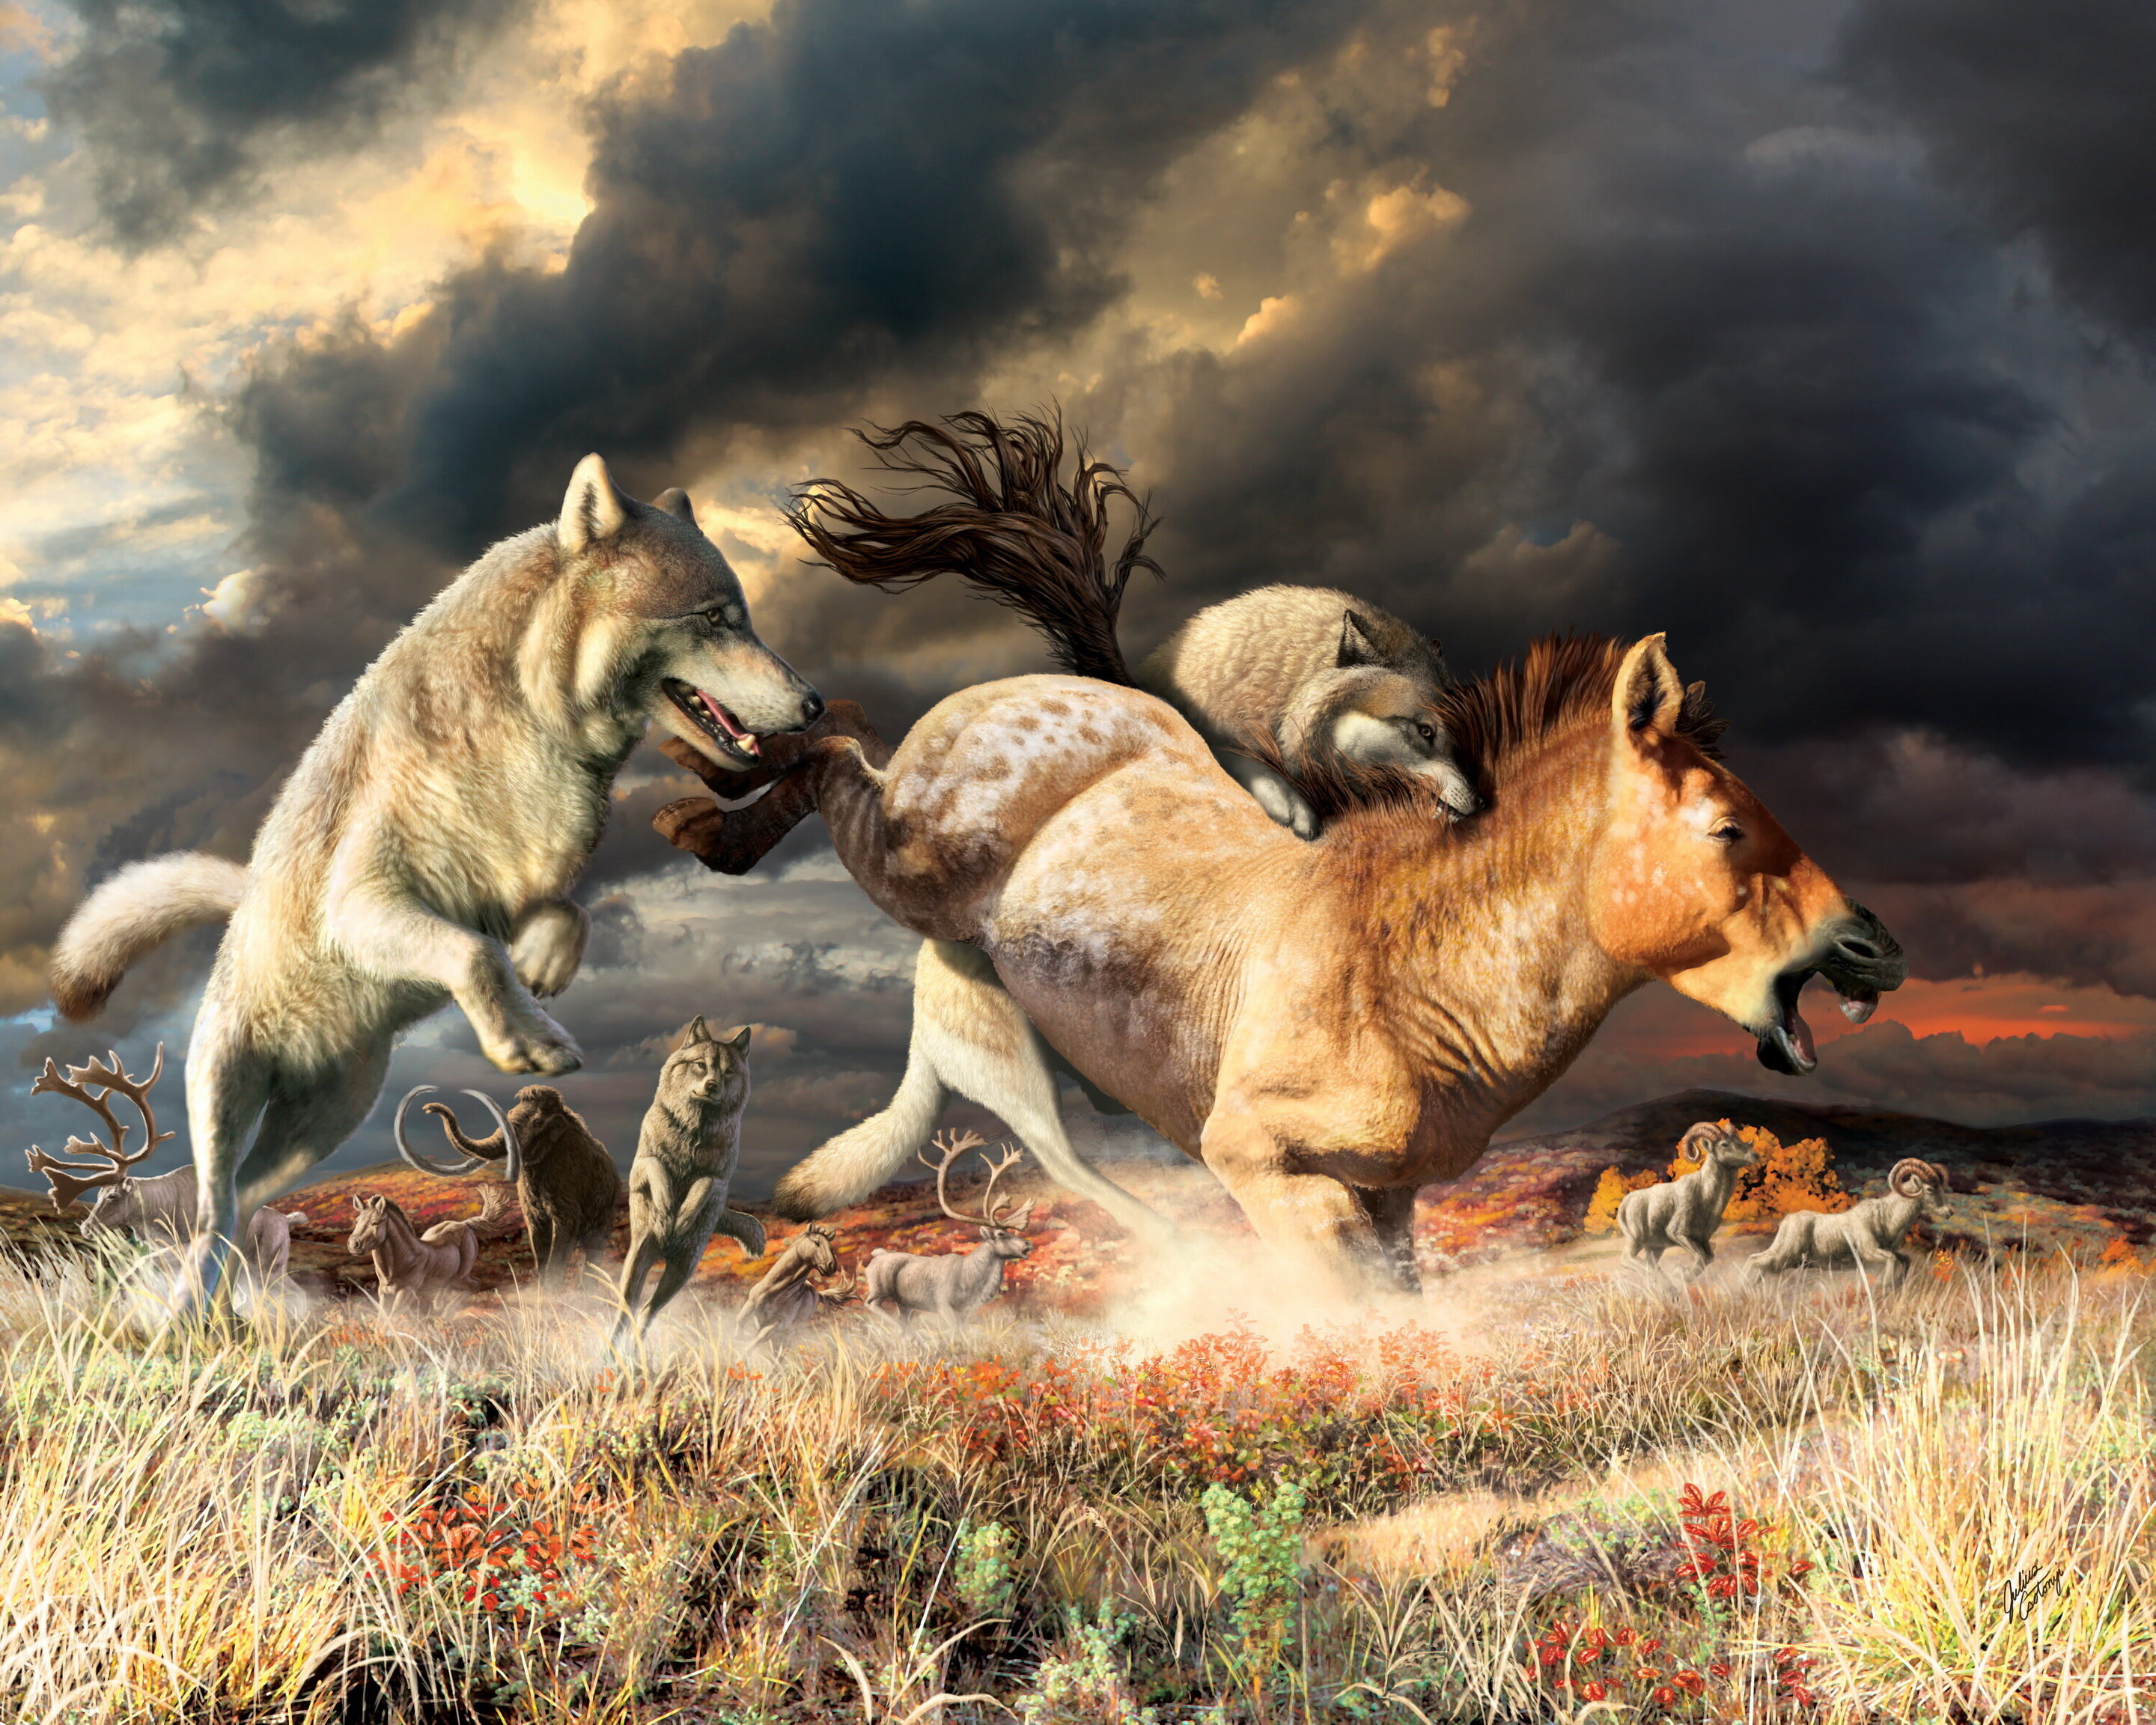 Change in diet allowed gray wolves to survive the extinction of the ice age